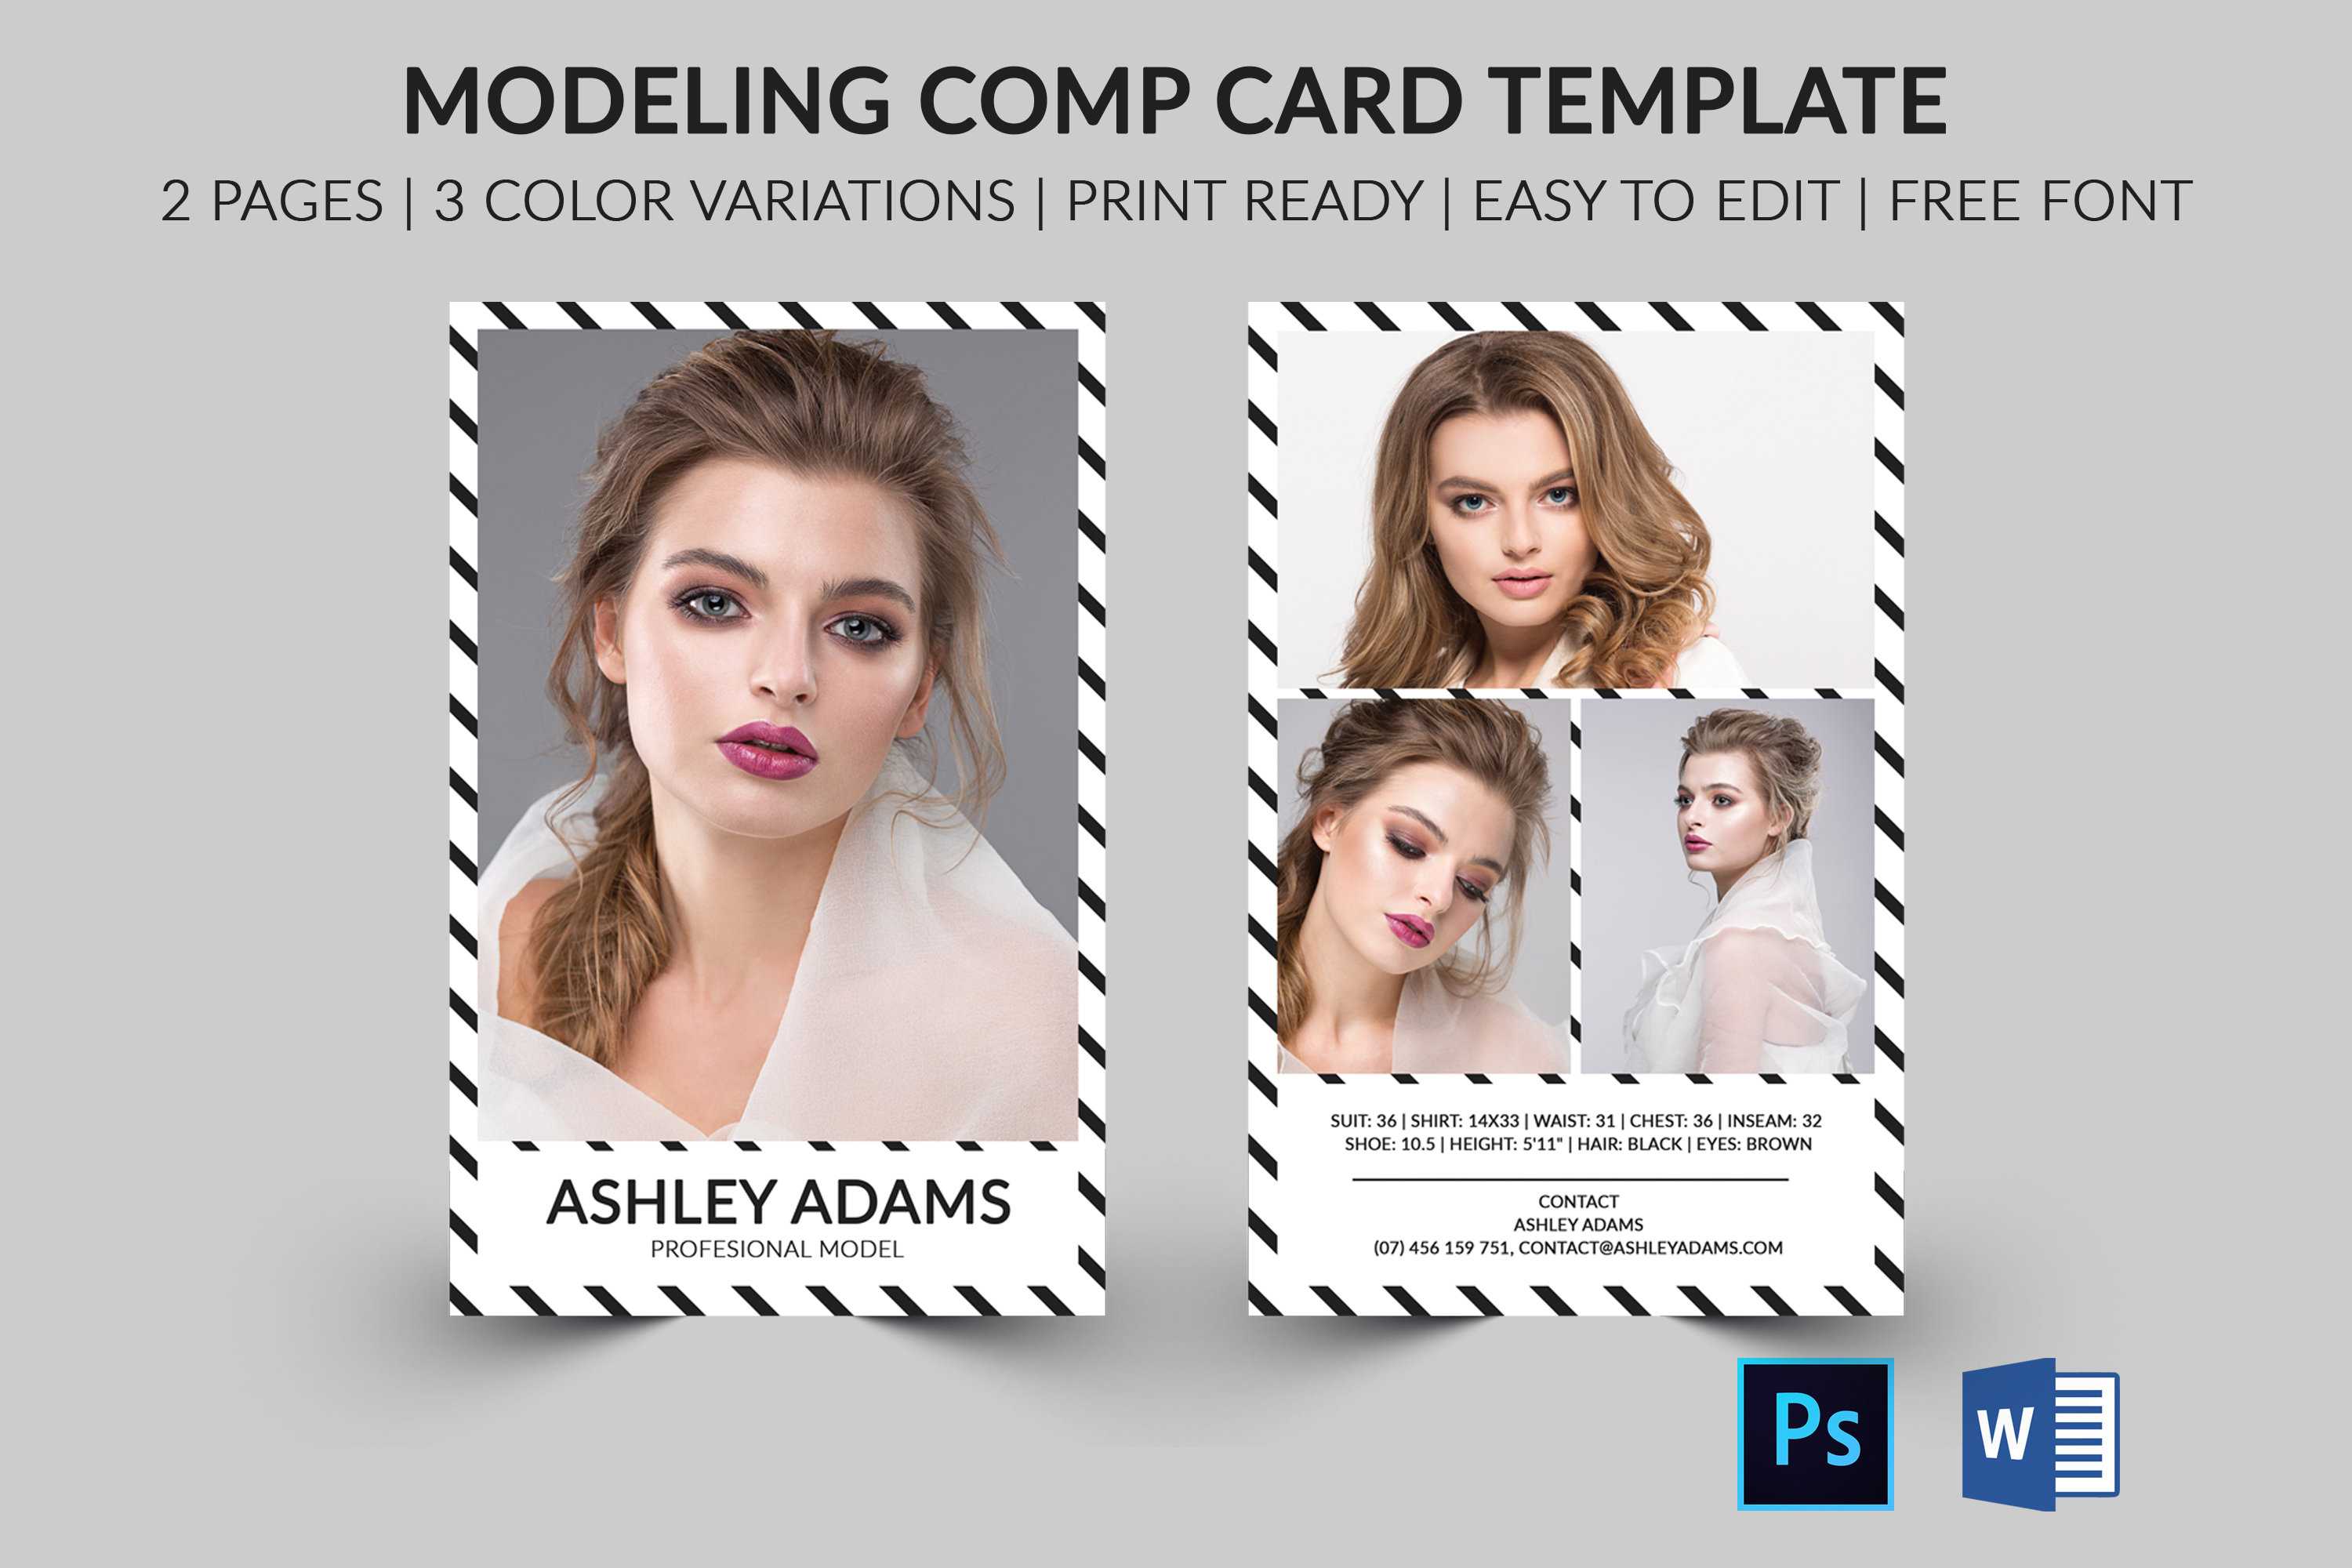 Modeling Comp Card | Model Agency Zed Card | Photoshop, Elements & Ms Word  Template |Modeling Card | Instant Download | For Free Zed Card Template